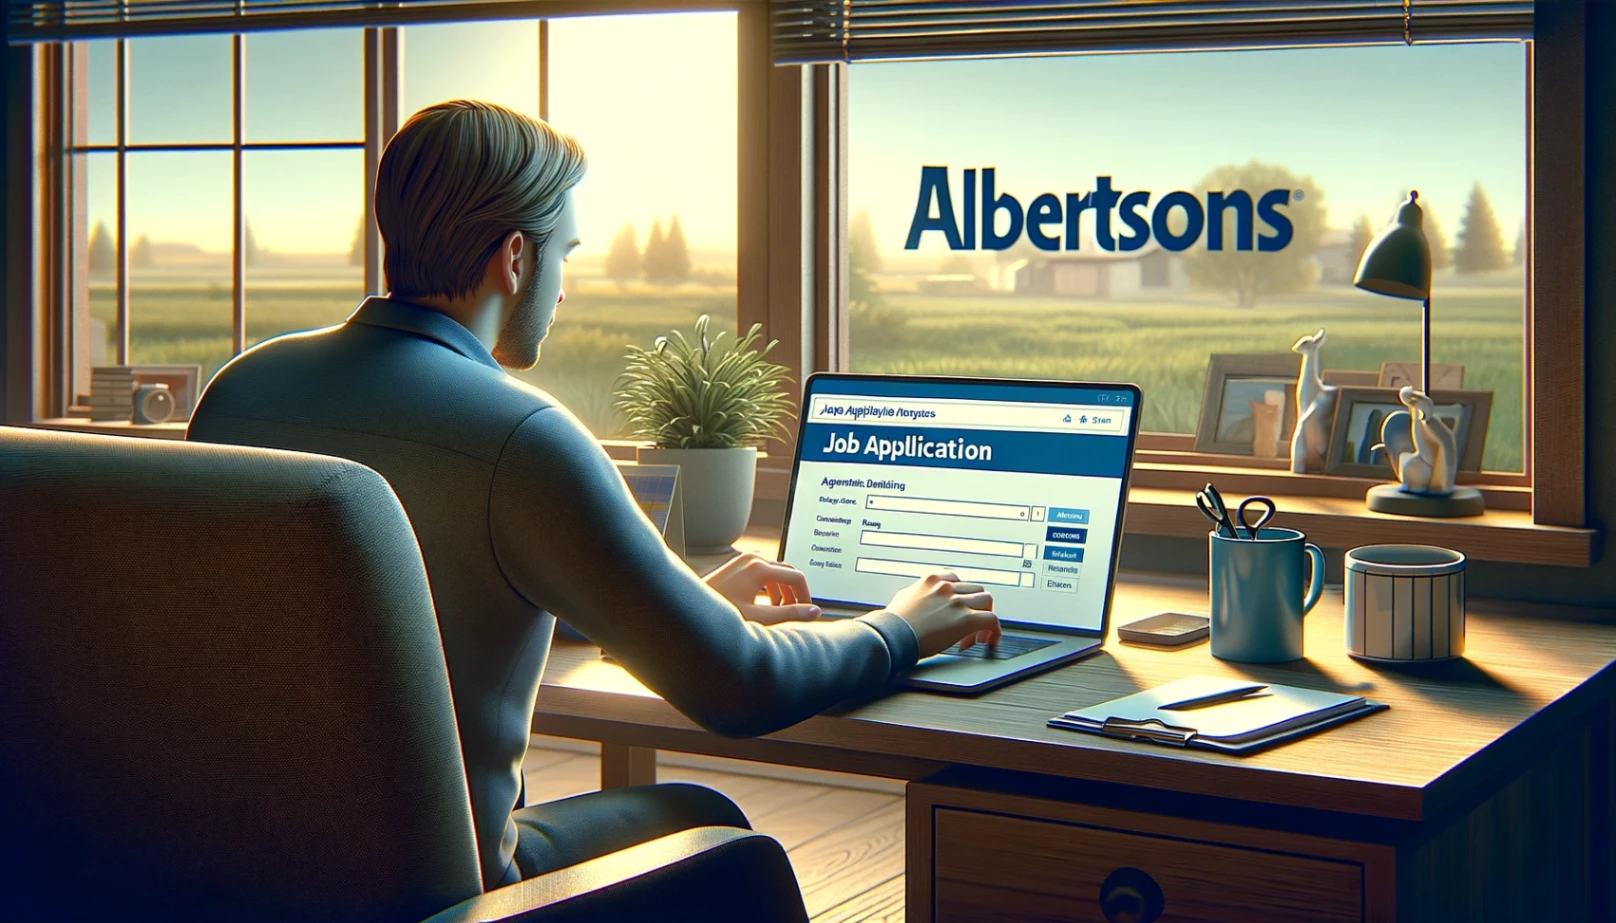 Albertsons: Hiring Application for Various Roles